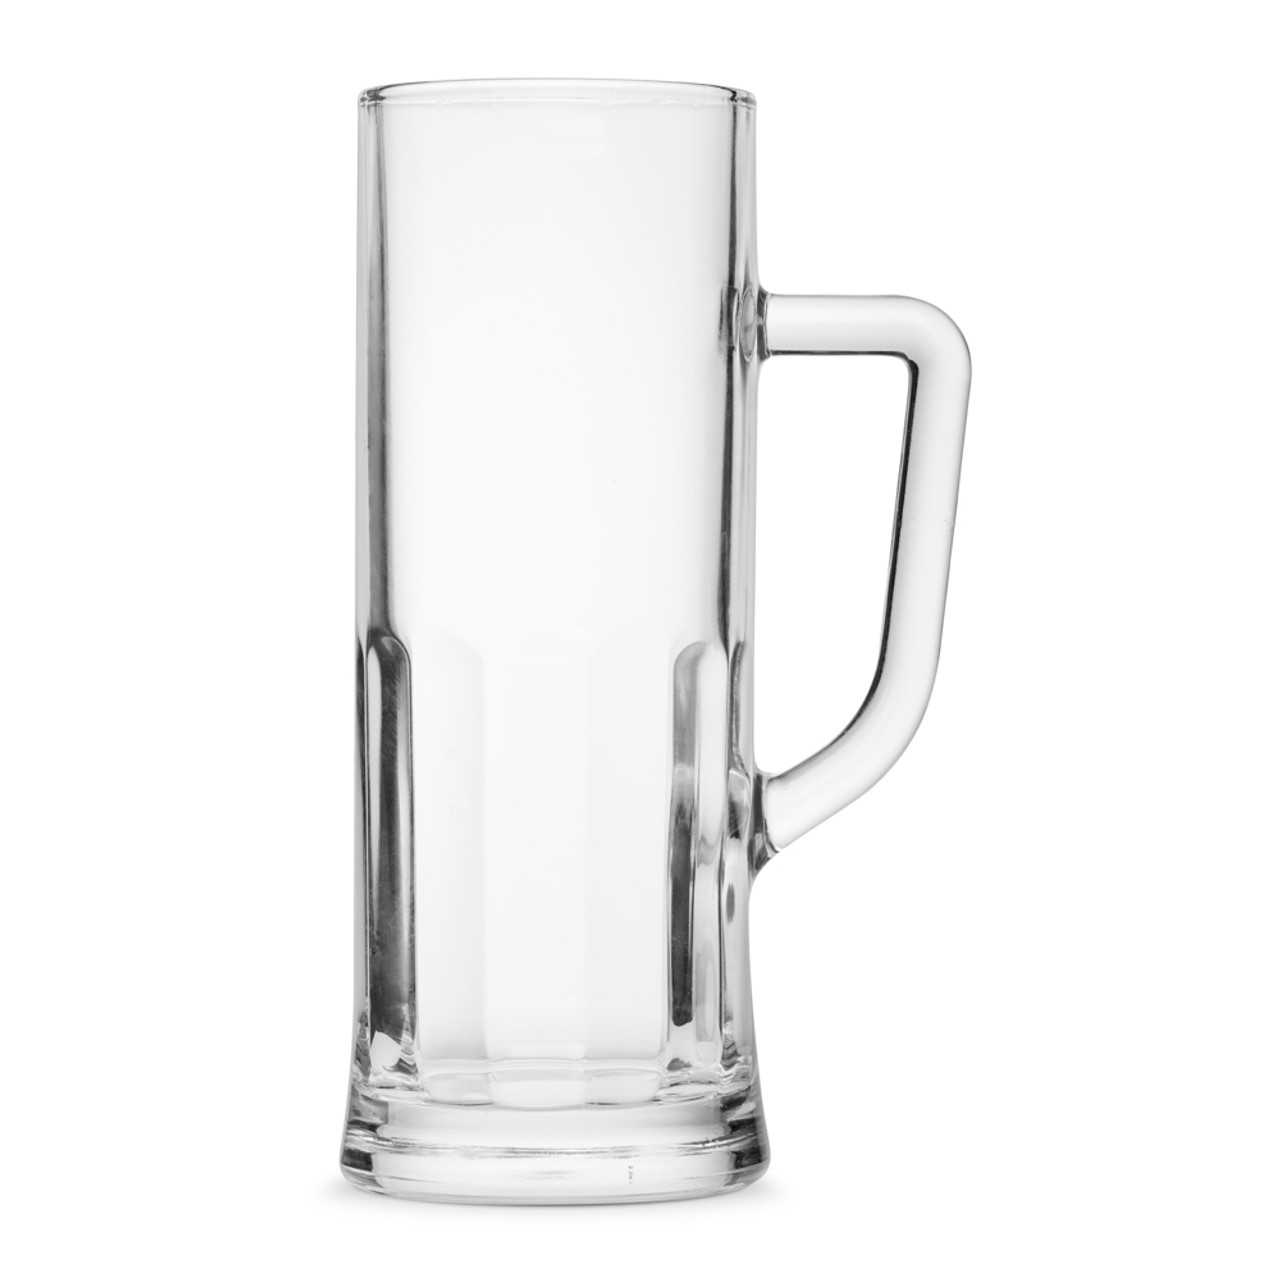 Clear Glass Beer Mugs with Handle 16 oz. Heavy Bottomed set of 4 6 tall